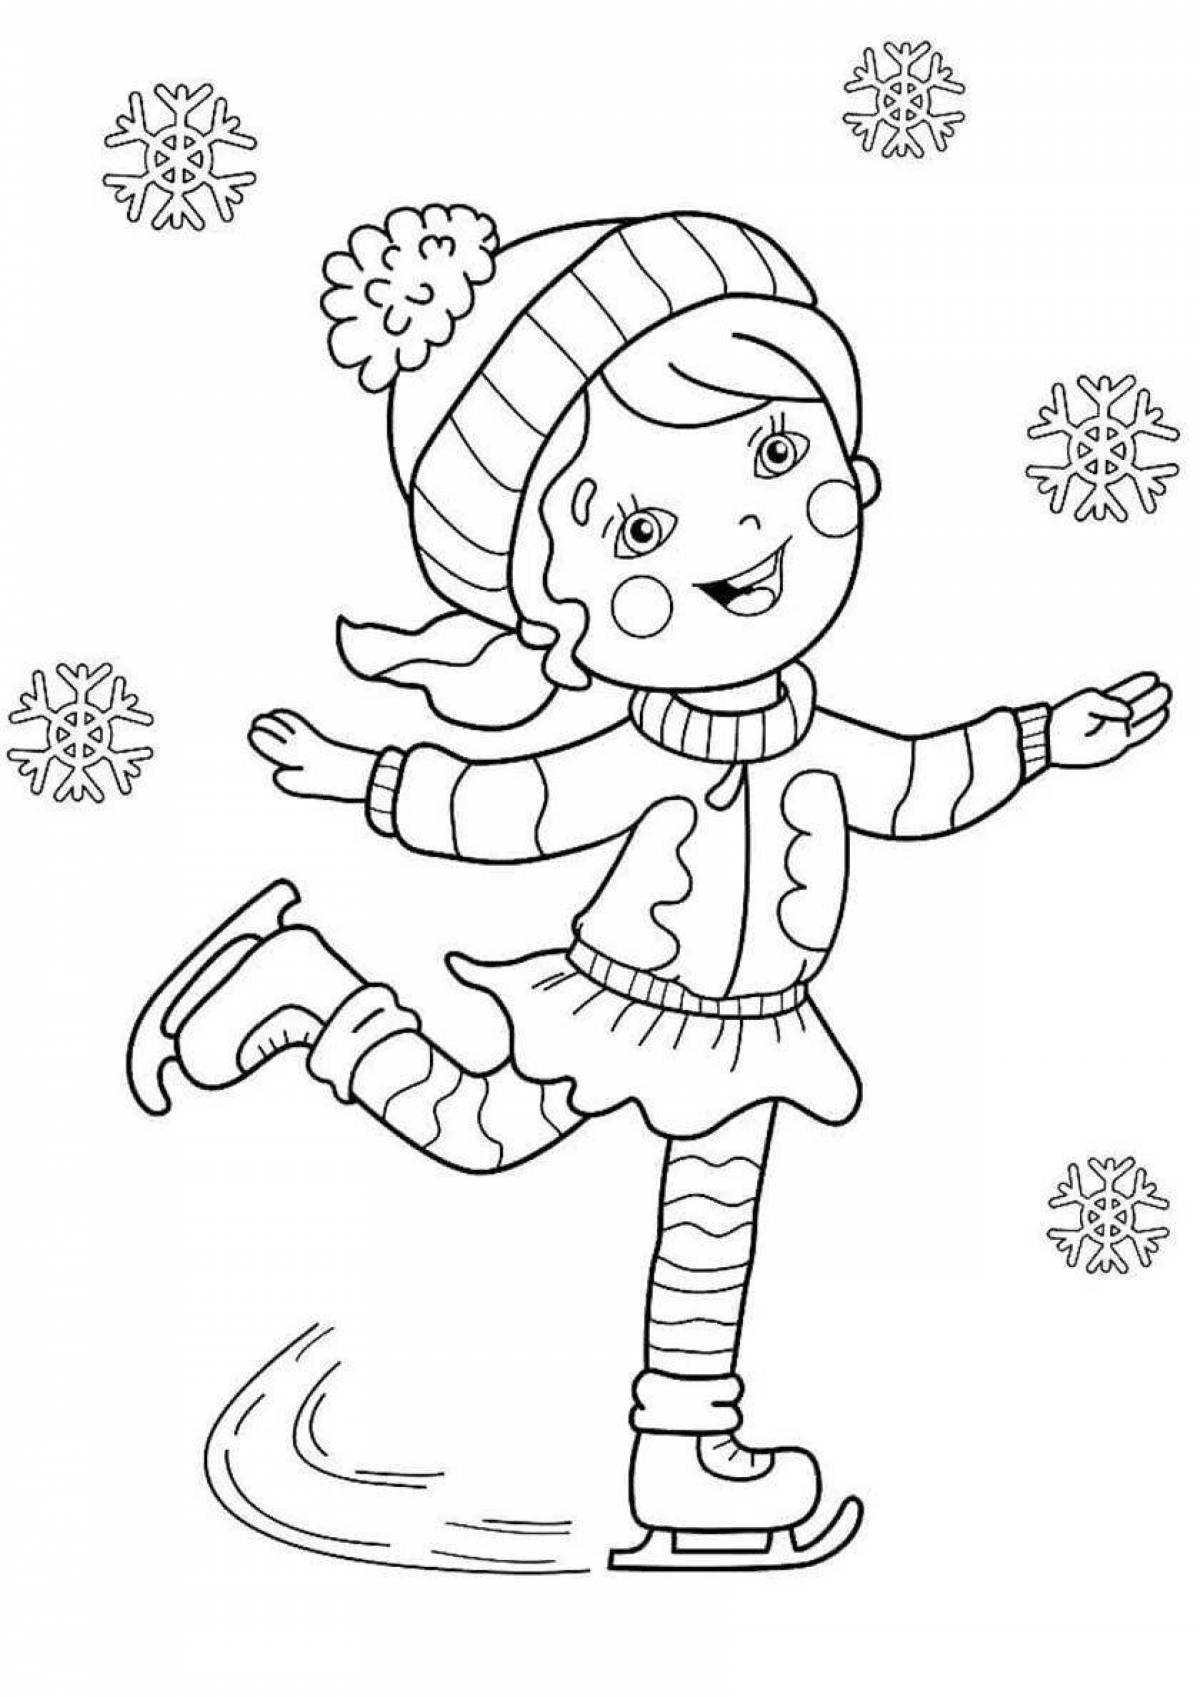 Color skating coloring page for kids